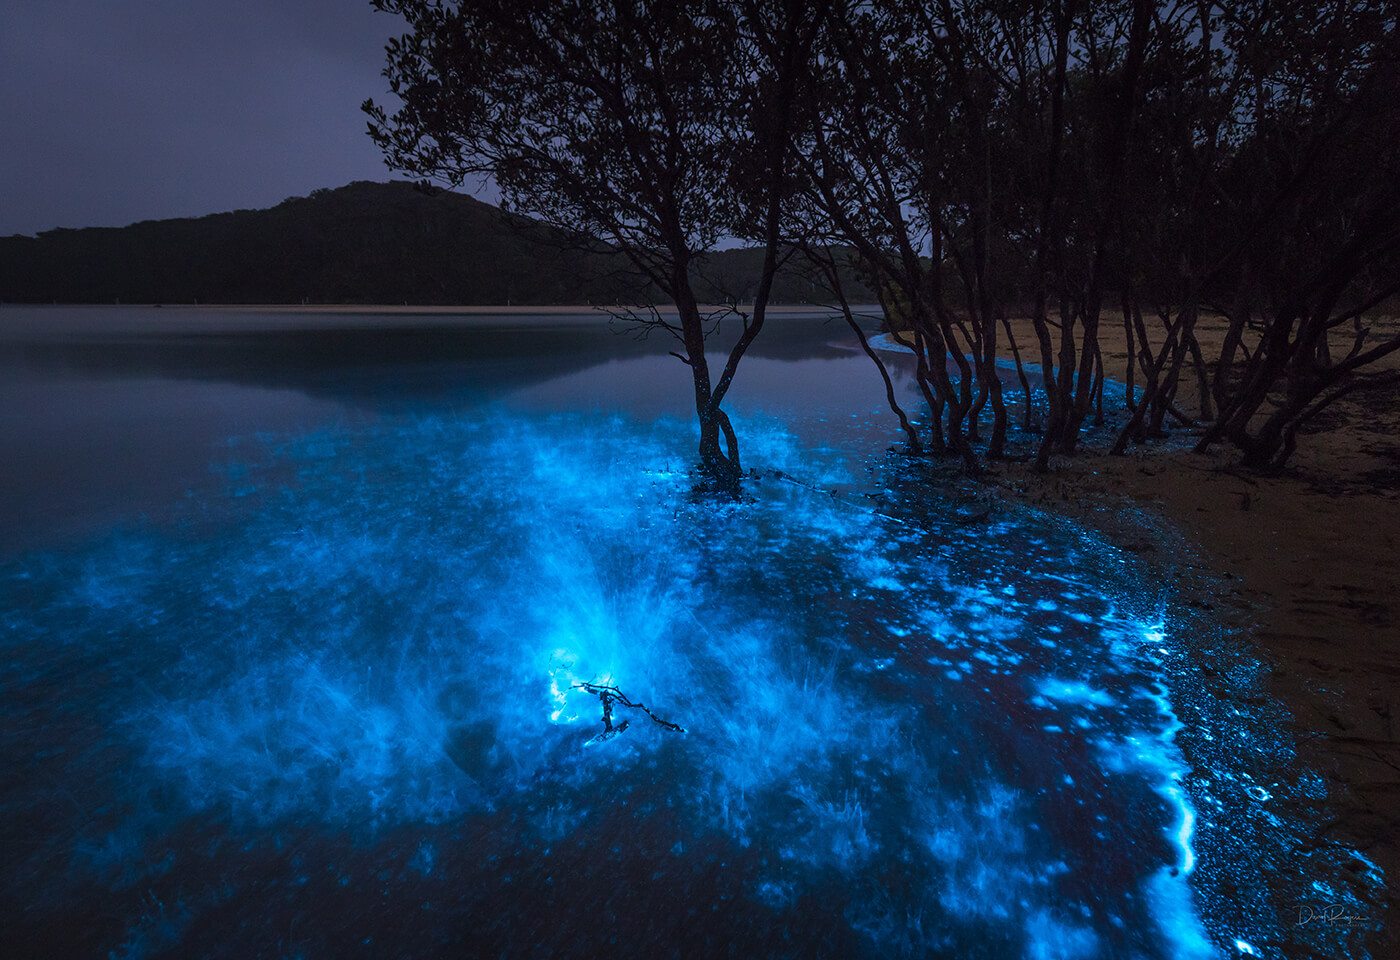 Bioluminescence Photography by David Rogers @davey_rogers